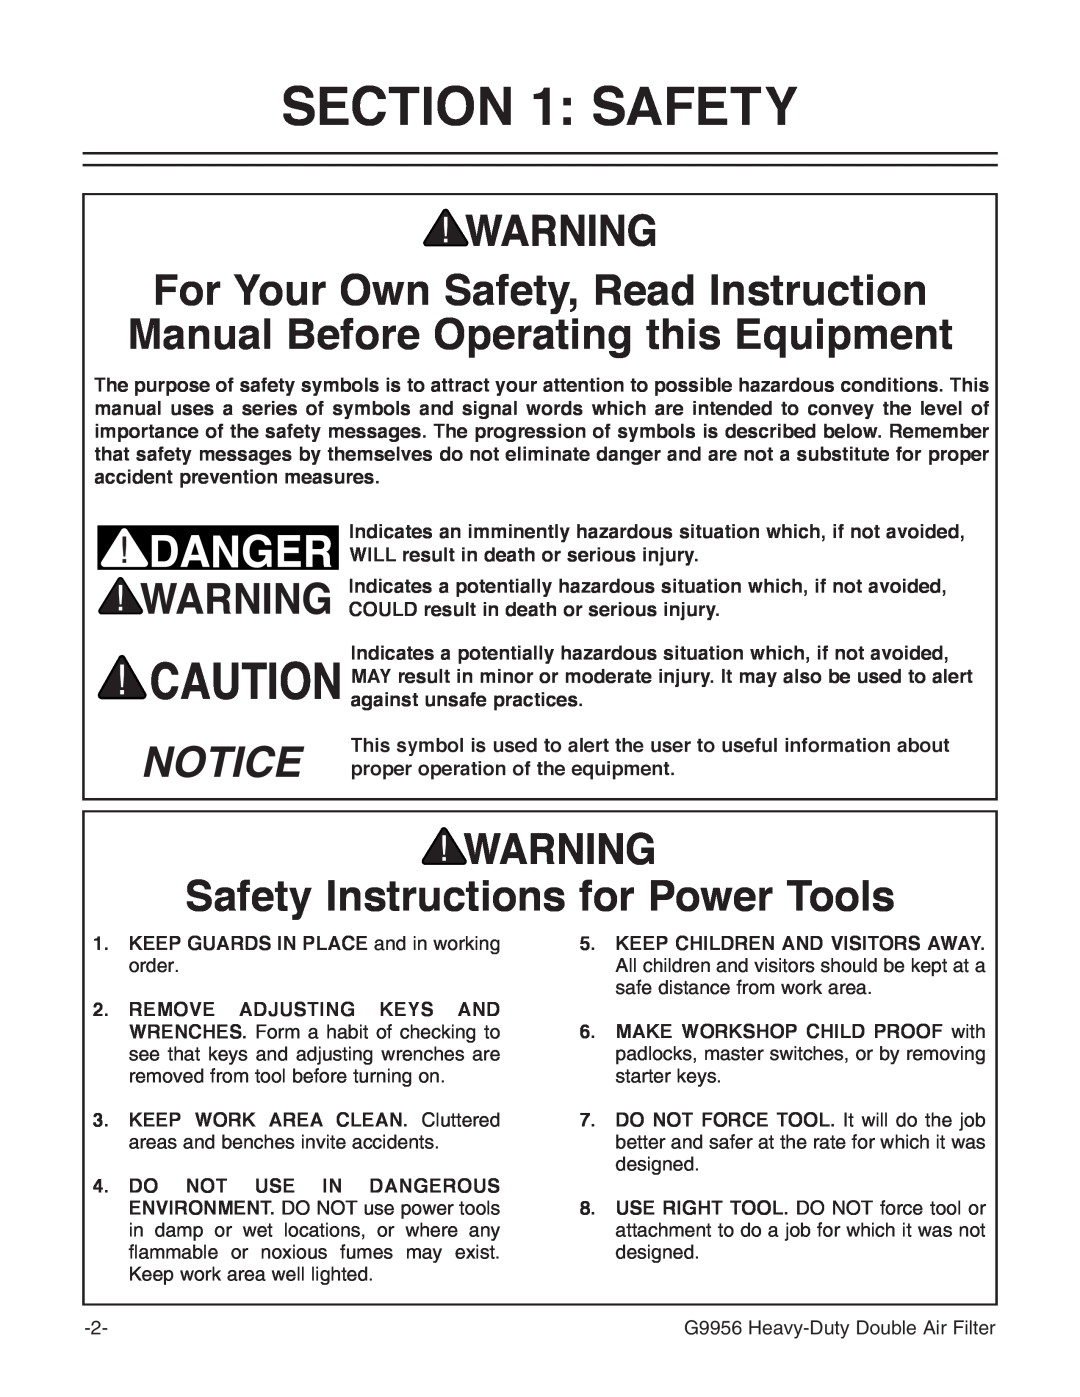 Grizzly G9956 instruction manual Safety Instructions for Power Tools 